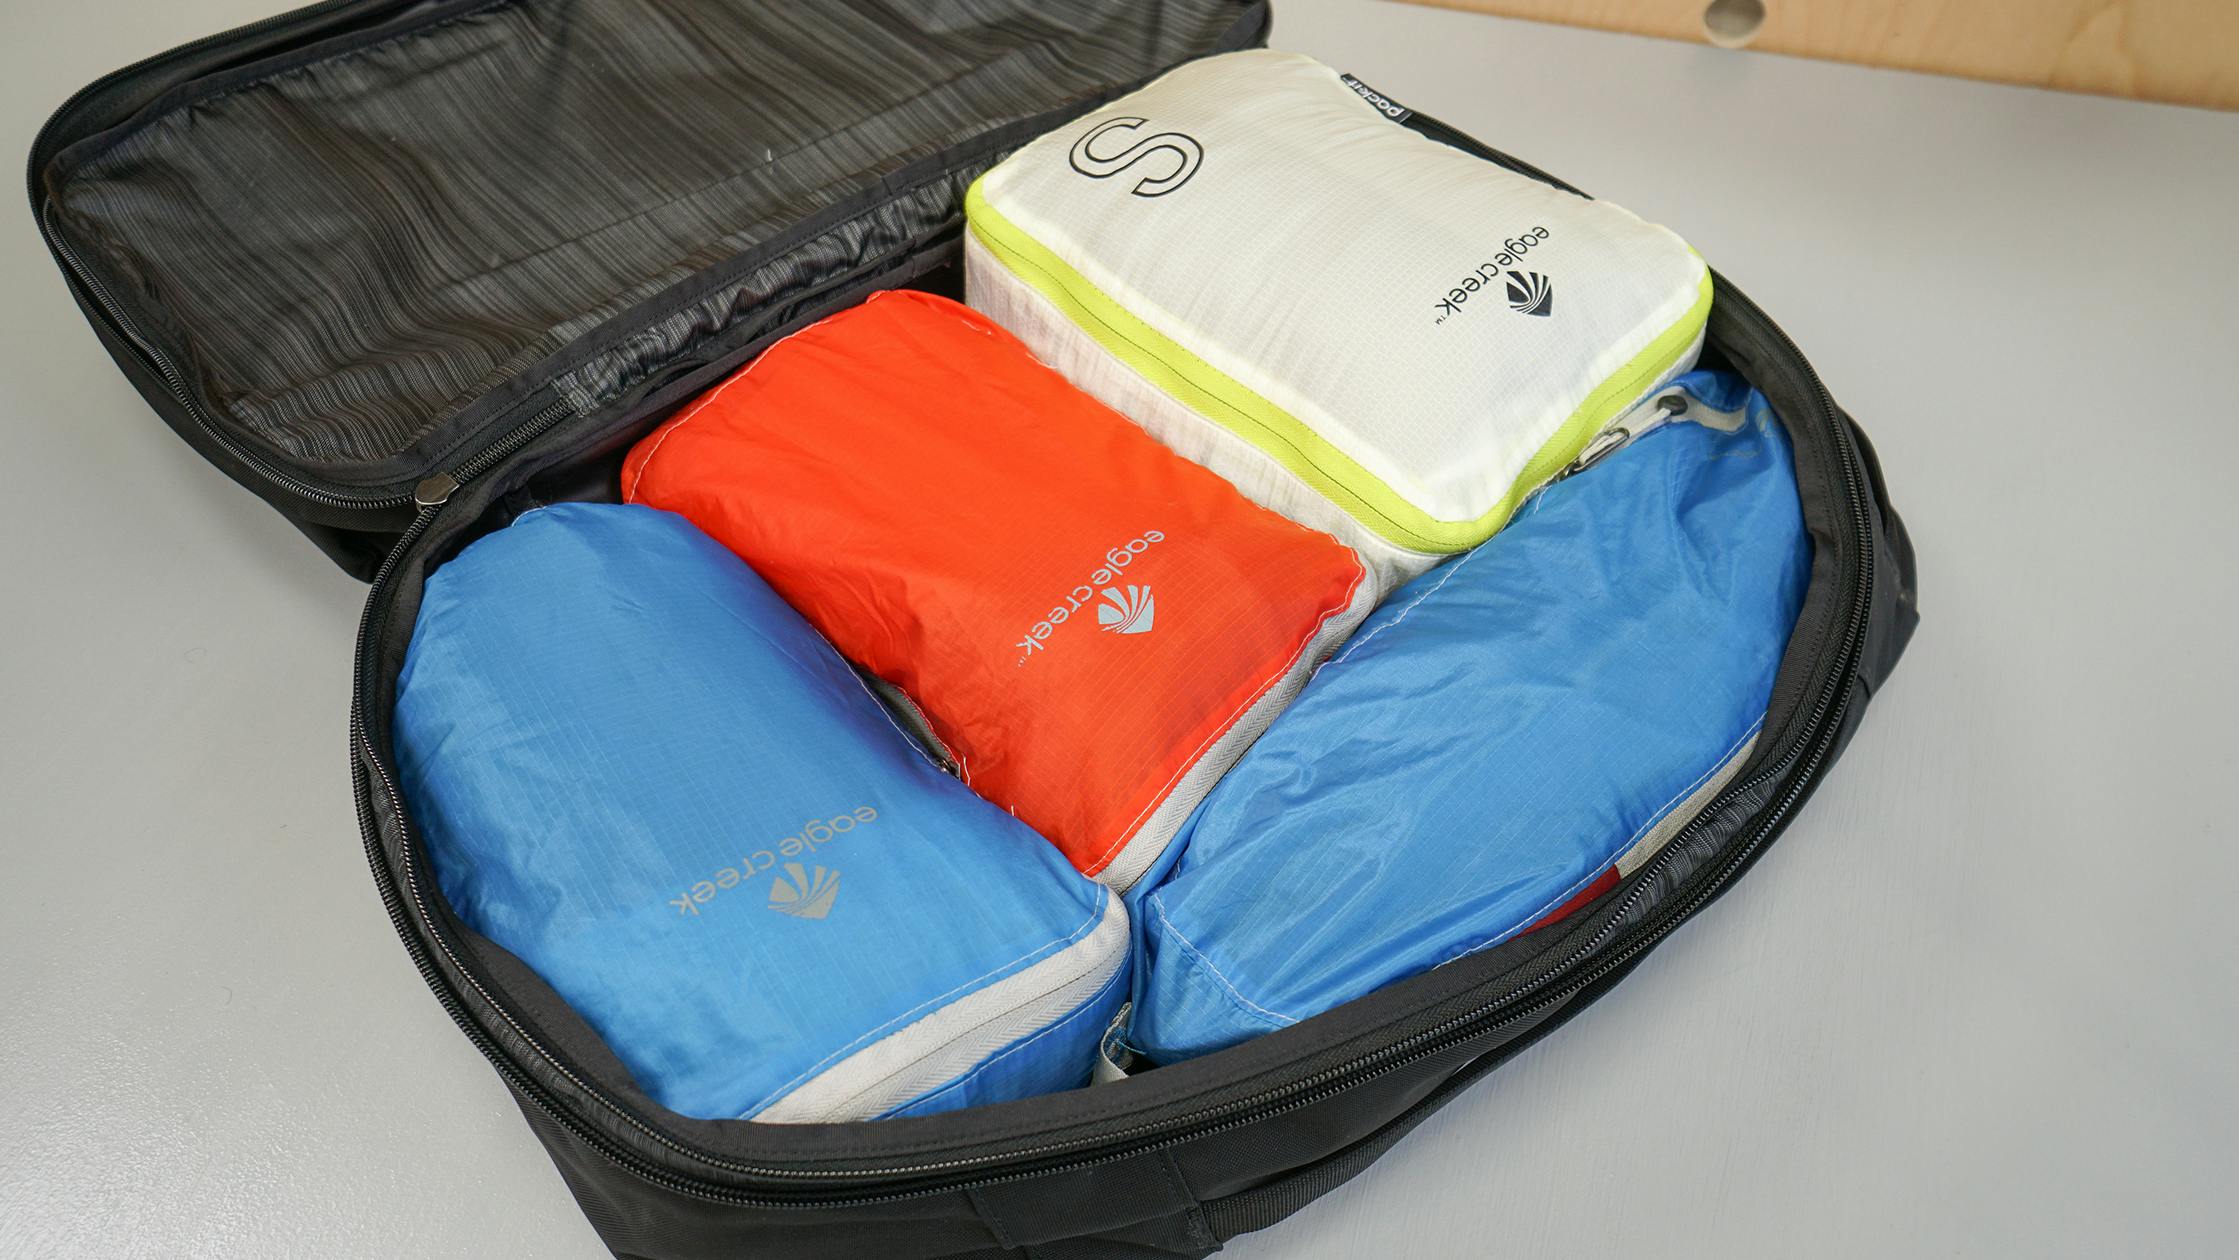 Packing cubes in a bag